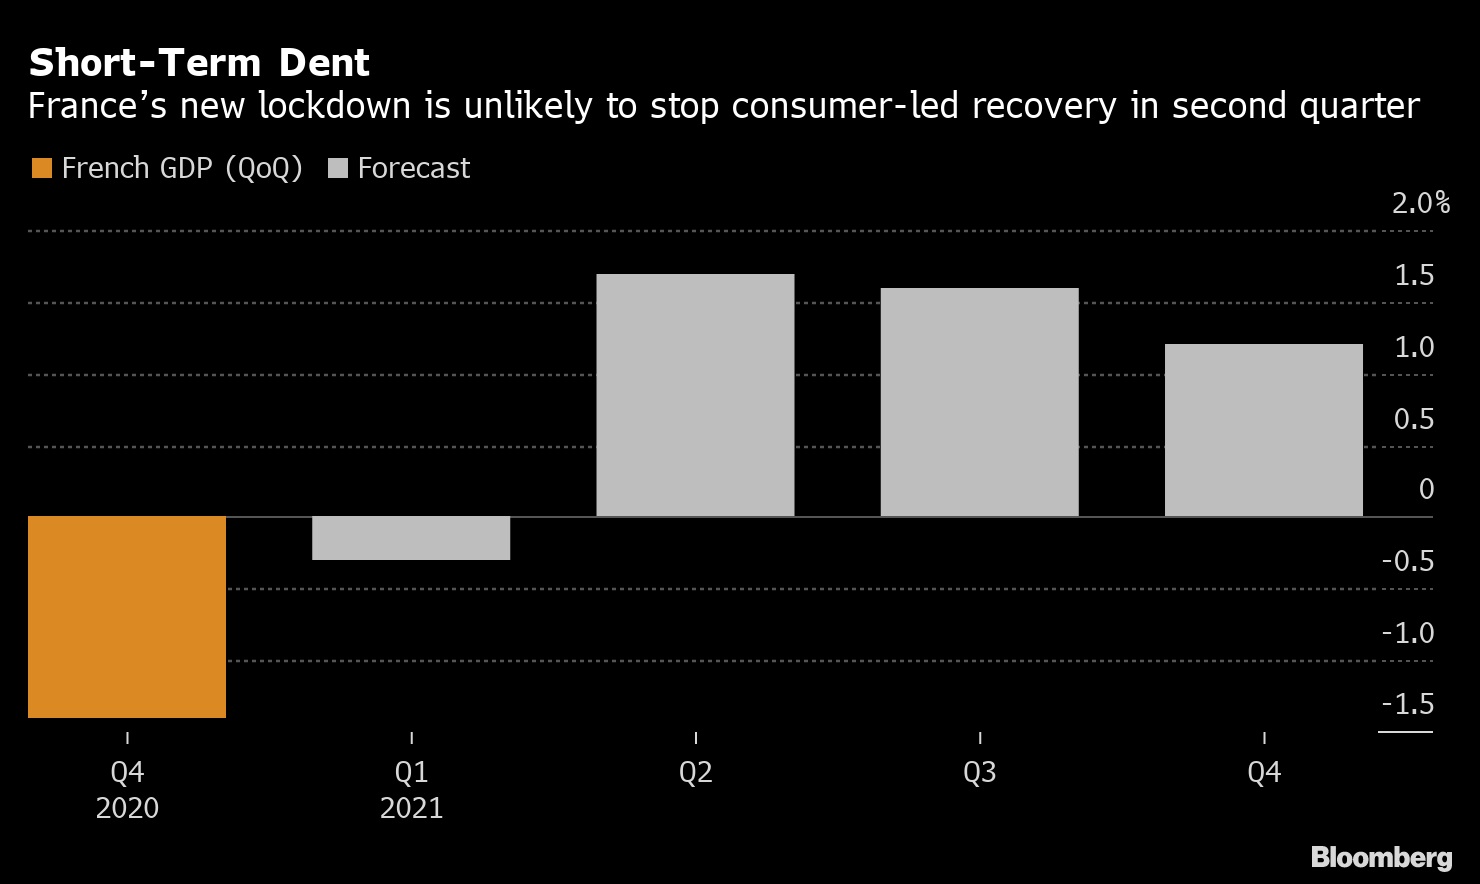 France’s New Lockdown Won’t Stop Consumer-Led Recovery: Chart - Bloomberg